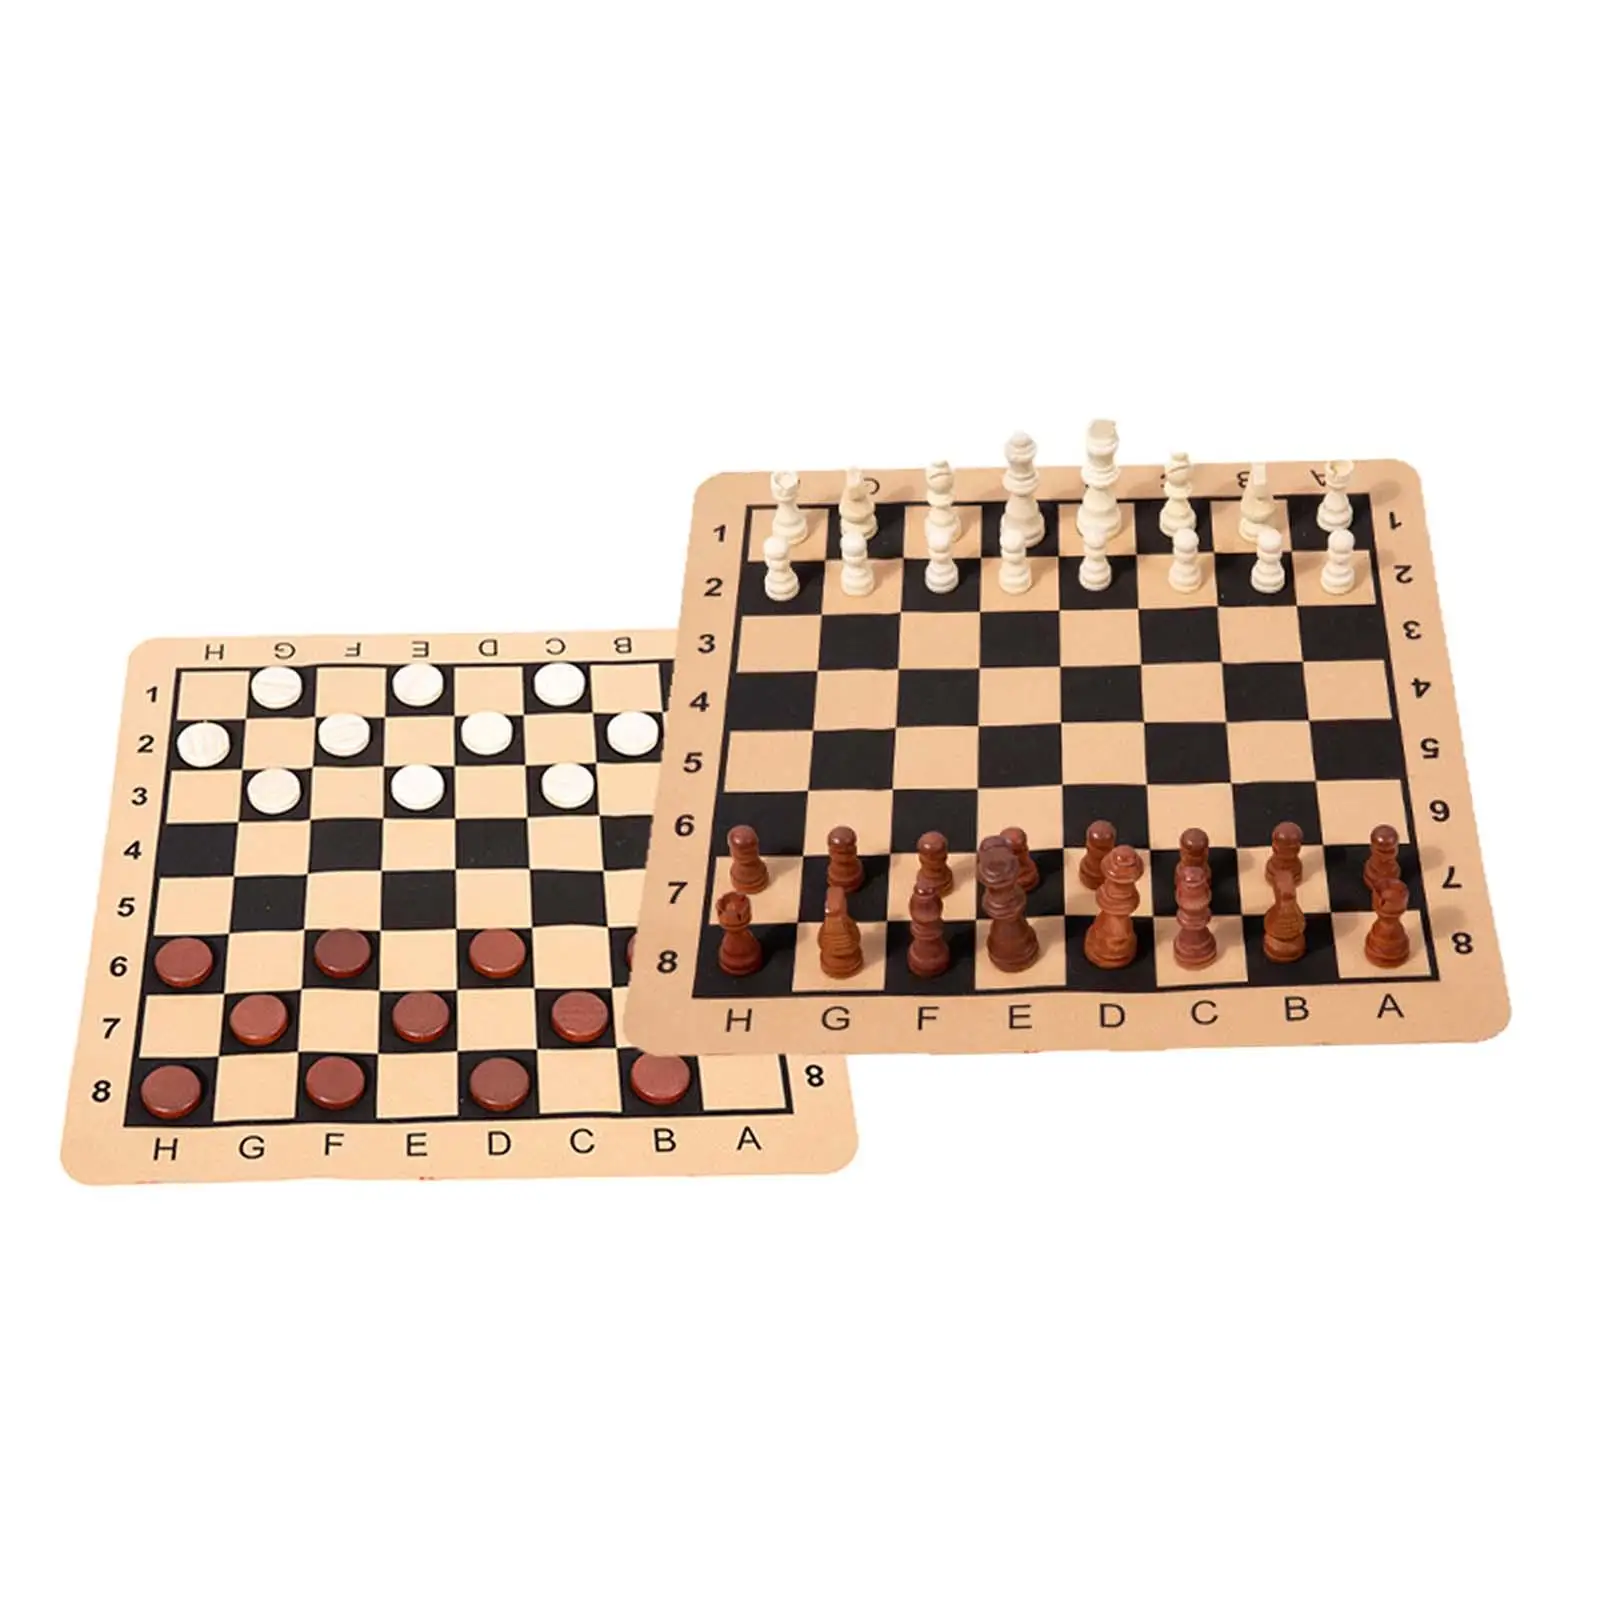 Portable Chess & Checkers Set Wooden Chess Pieces with Felt Bottom for Party